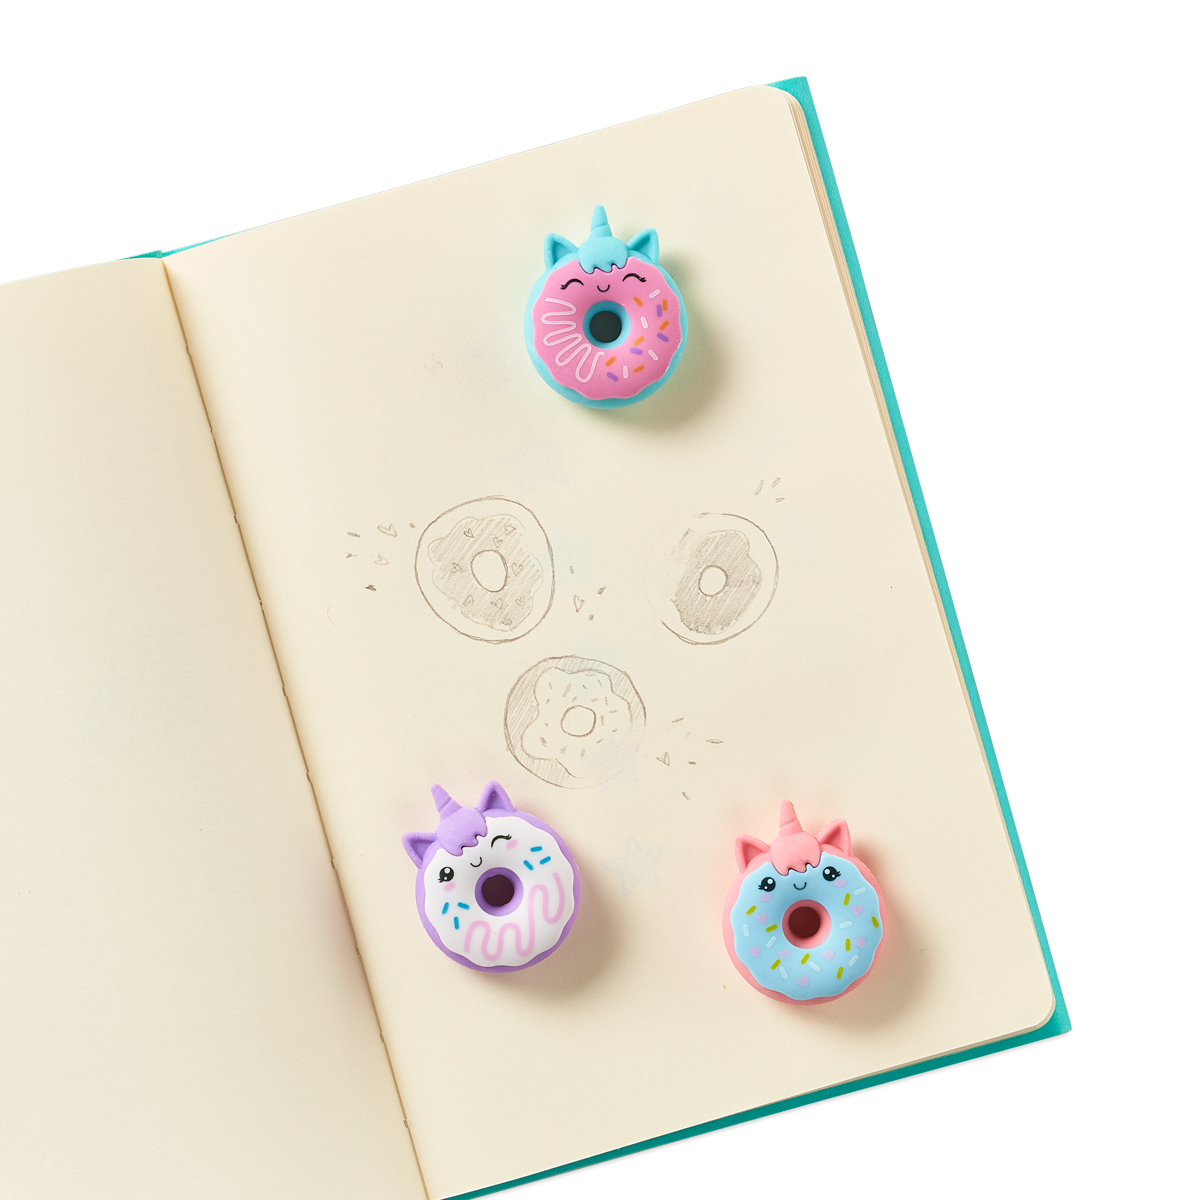 Magic Bakery Unicorn Donut Scented Erasers on a journal